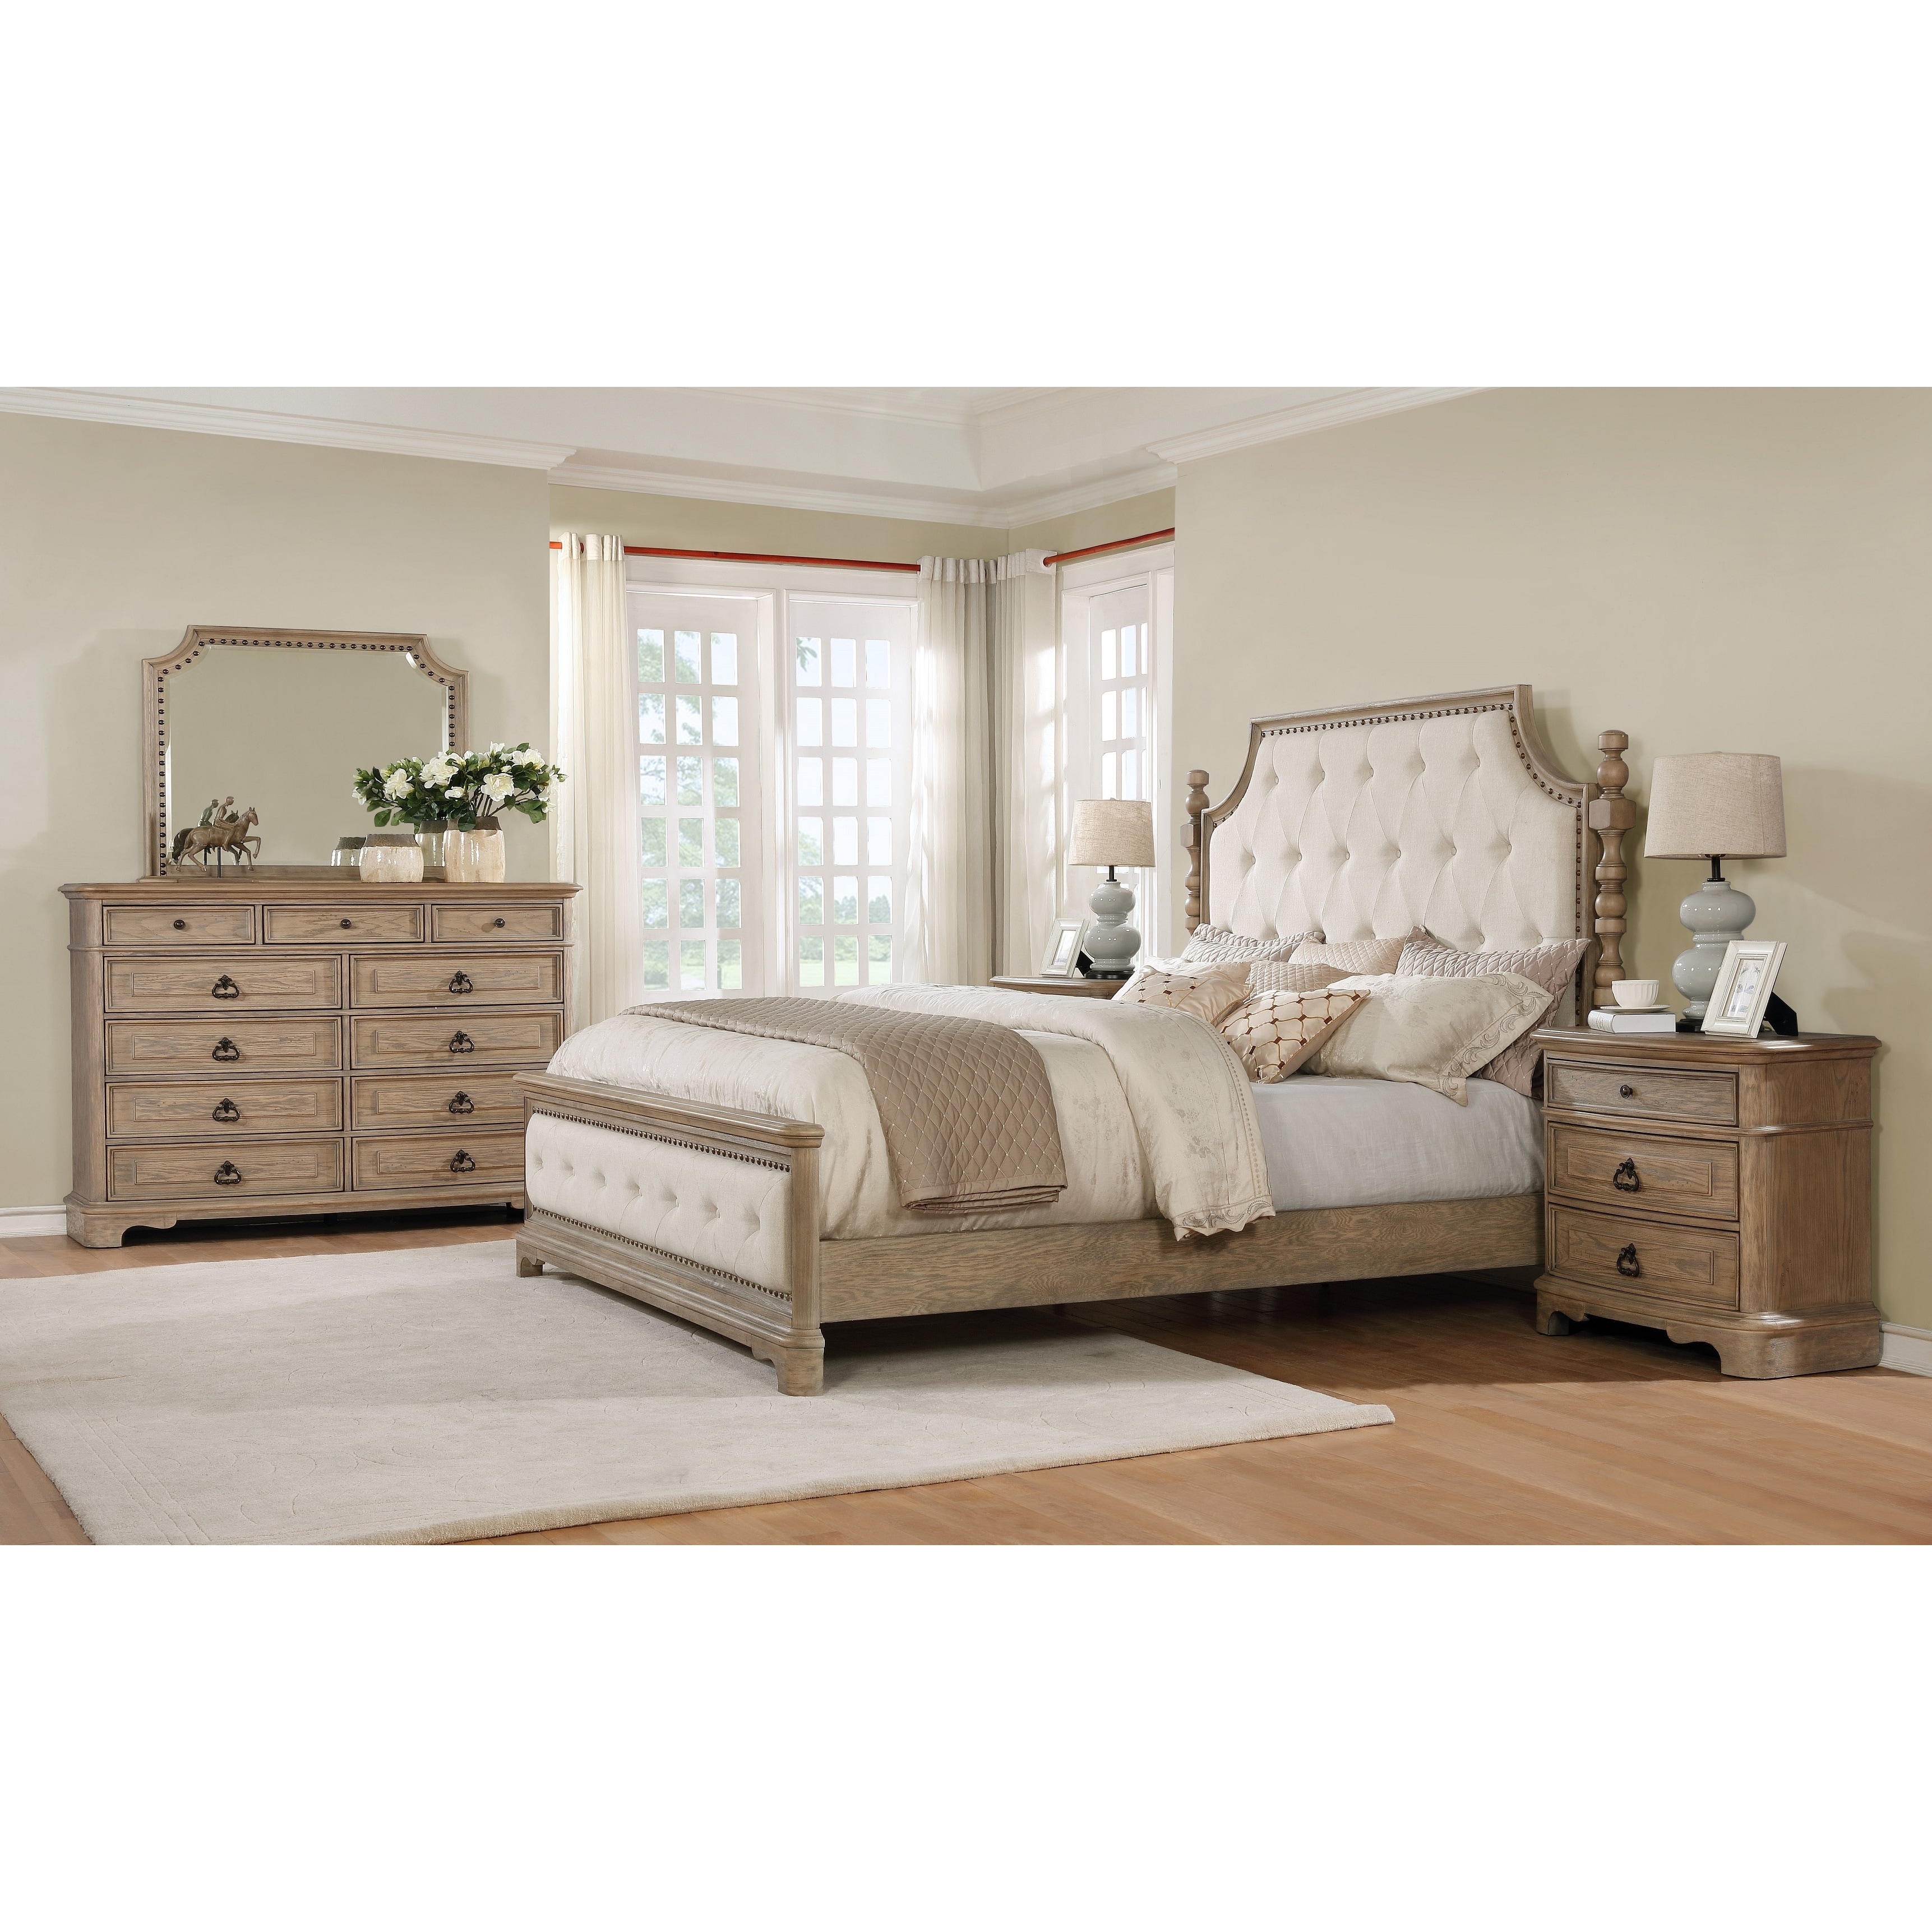 Piraeus 296 Solid Wood Construction Bedroom Set With King Size Bed Dresser Mirror And 2 Night Stands